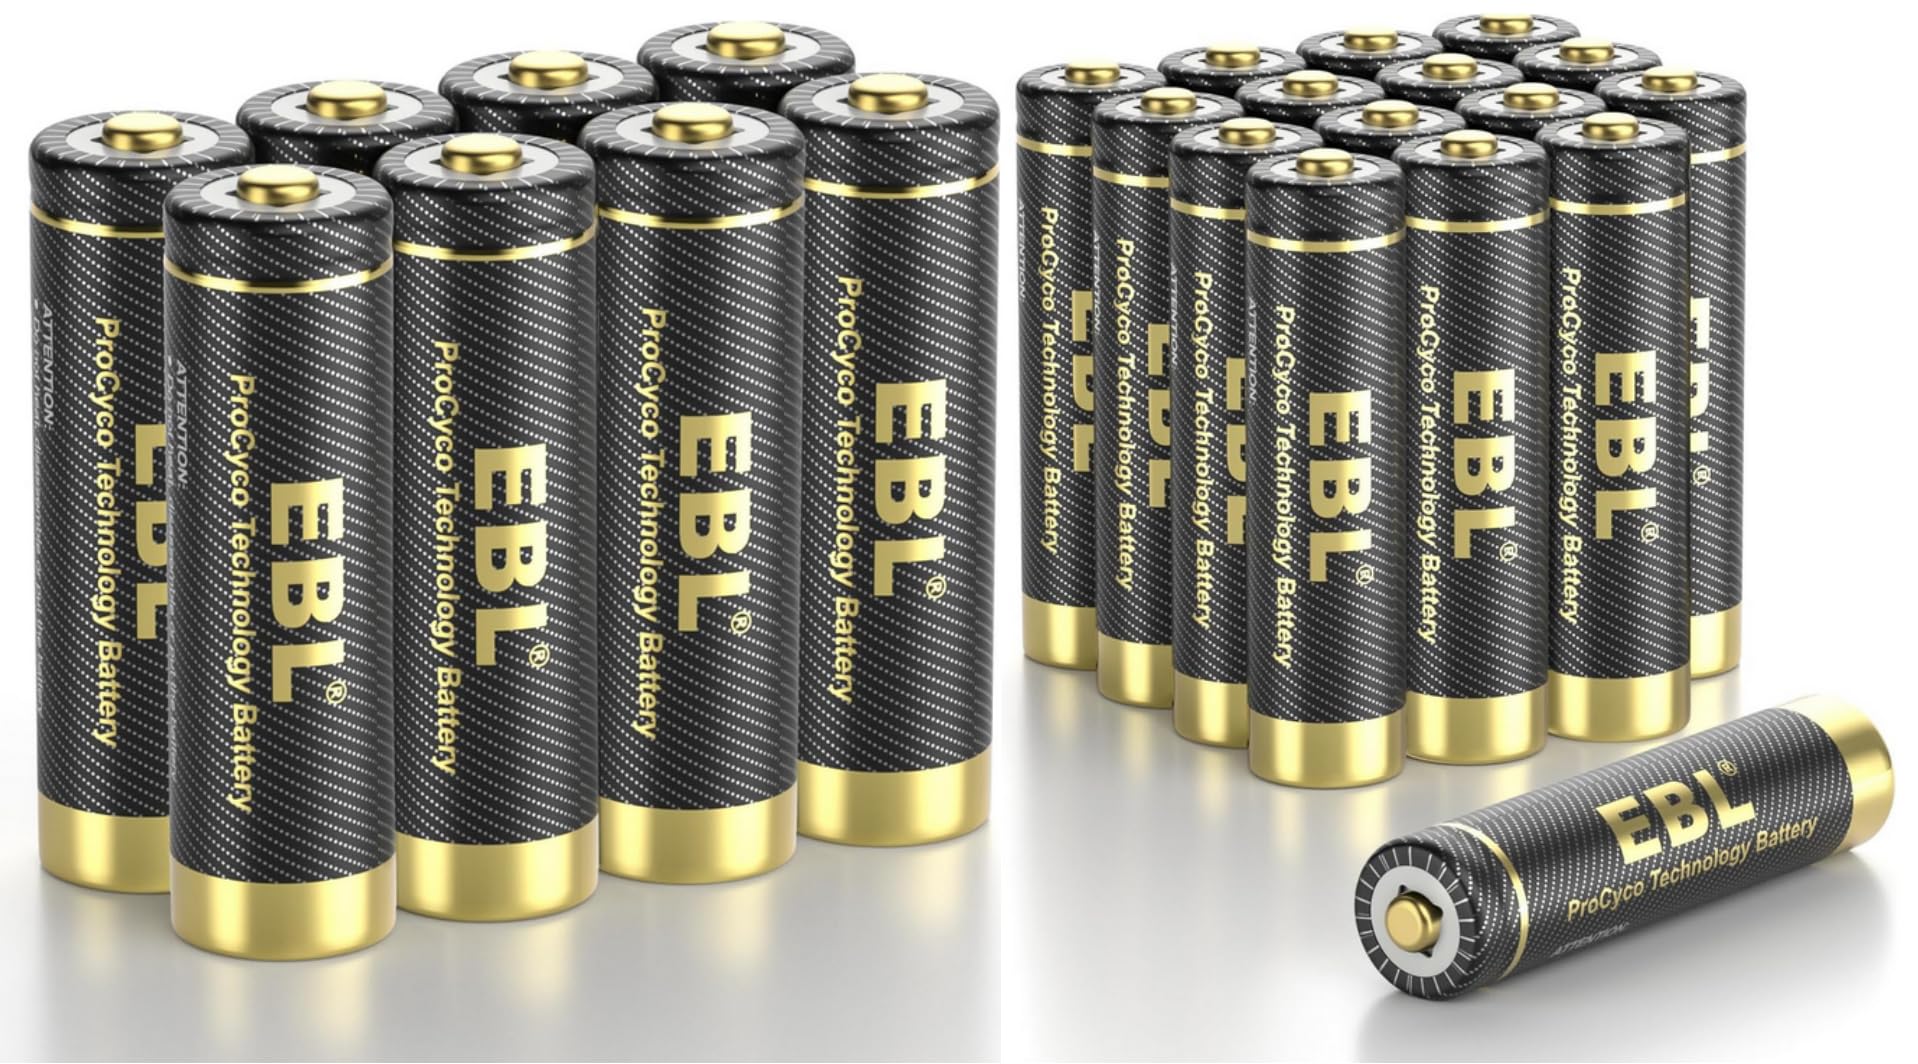 EBL Gold Pro Rechargeable AA AAA Batteries 24 Packs High Performance NIMH Battery